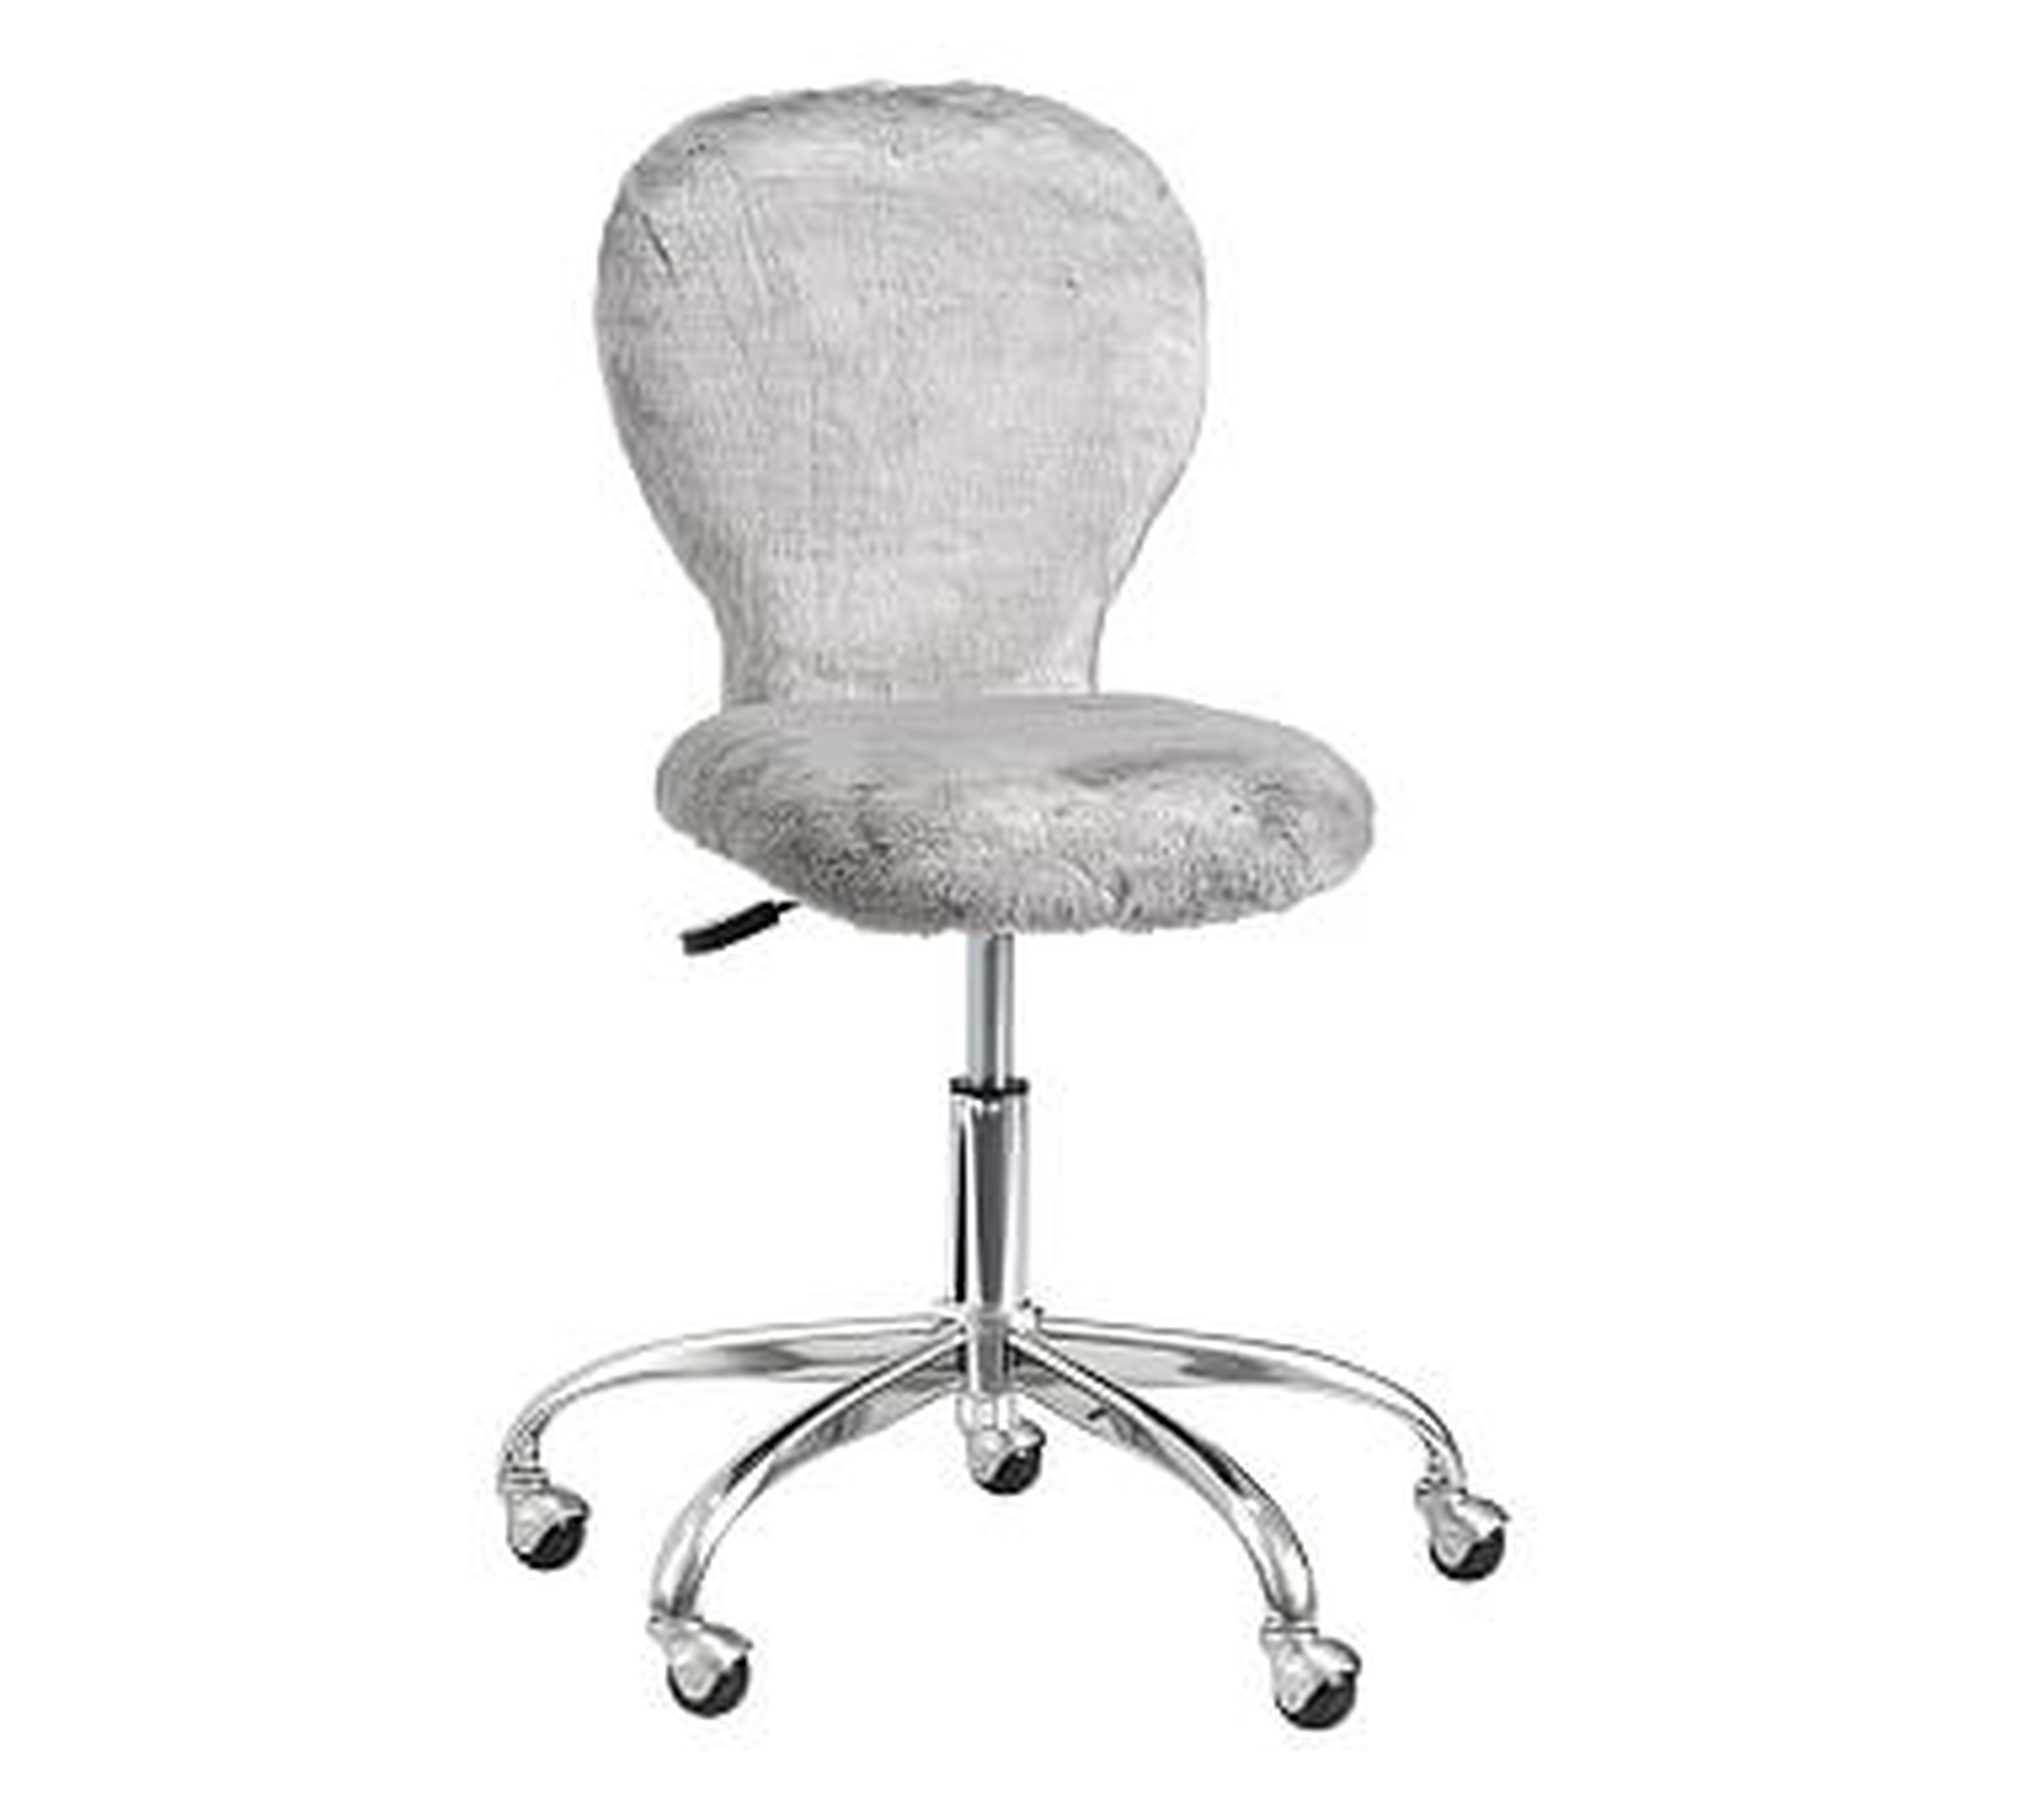 Swivel Round Upholstered Task Chair, Gray Fur, Unlimited Flat Rate Delivery - Pottery Barn Kids